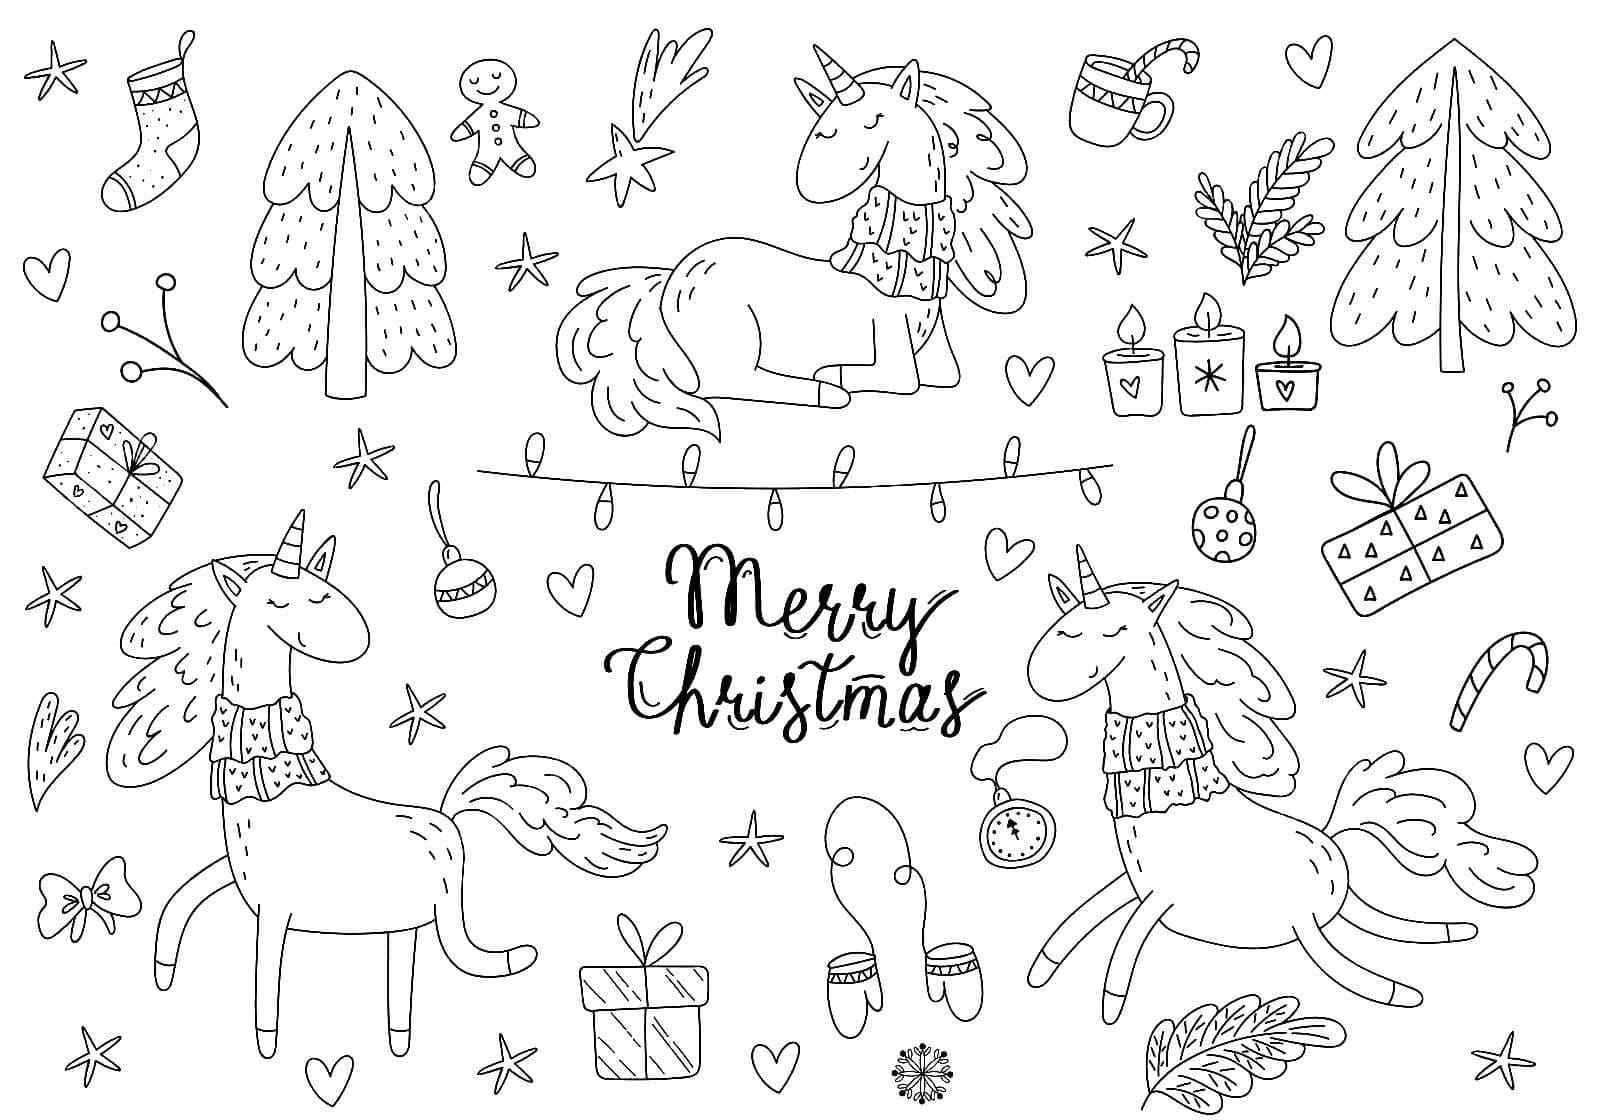 Funny Unicorns With Christmas Attributes